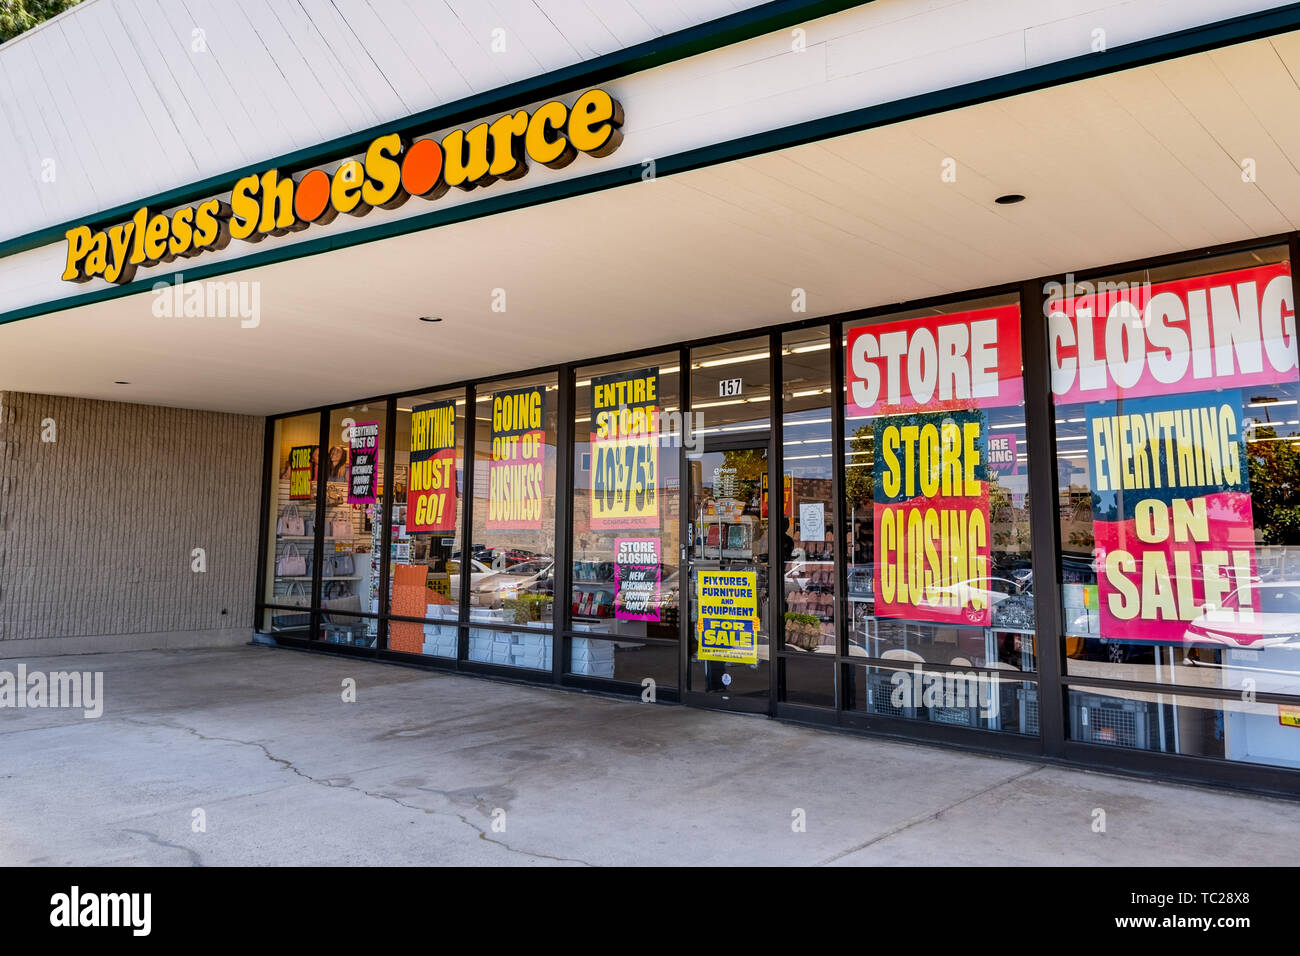 June 1, 2019 Sunnyvale / CA / USA - Payless Shoesource store with 'Store Closing', 'Entire store 40%-75% off', 'Everything on sale' and 'Going out of  Stock Photo